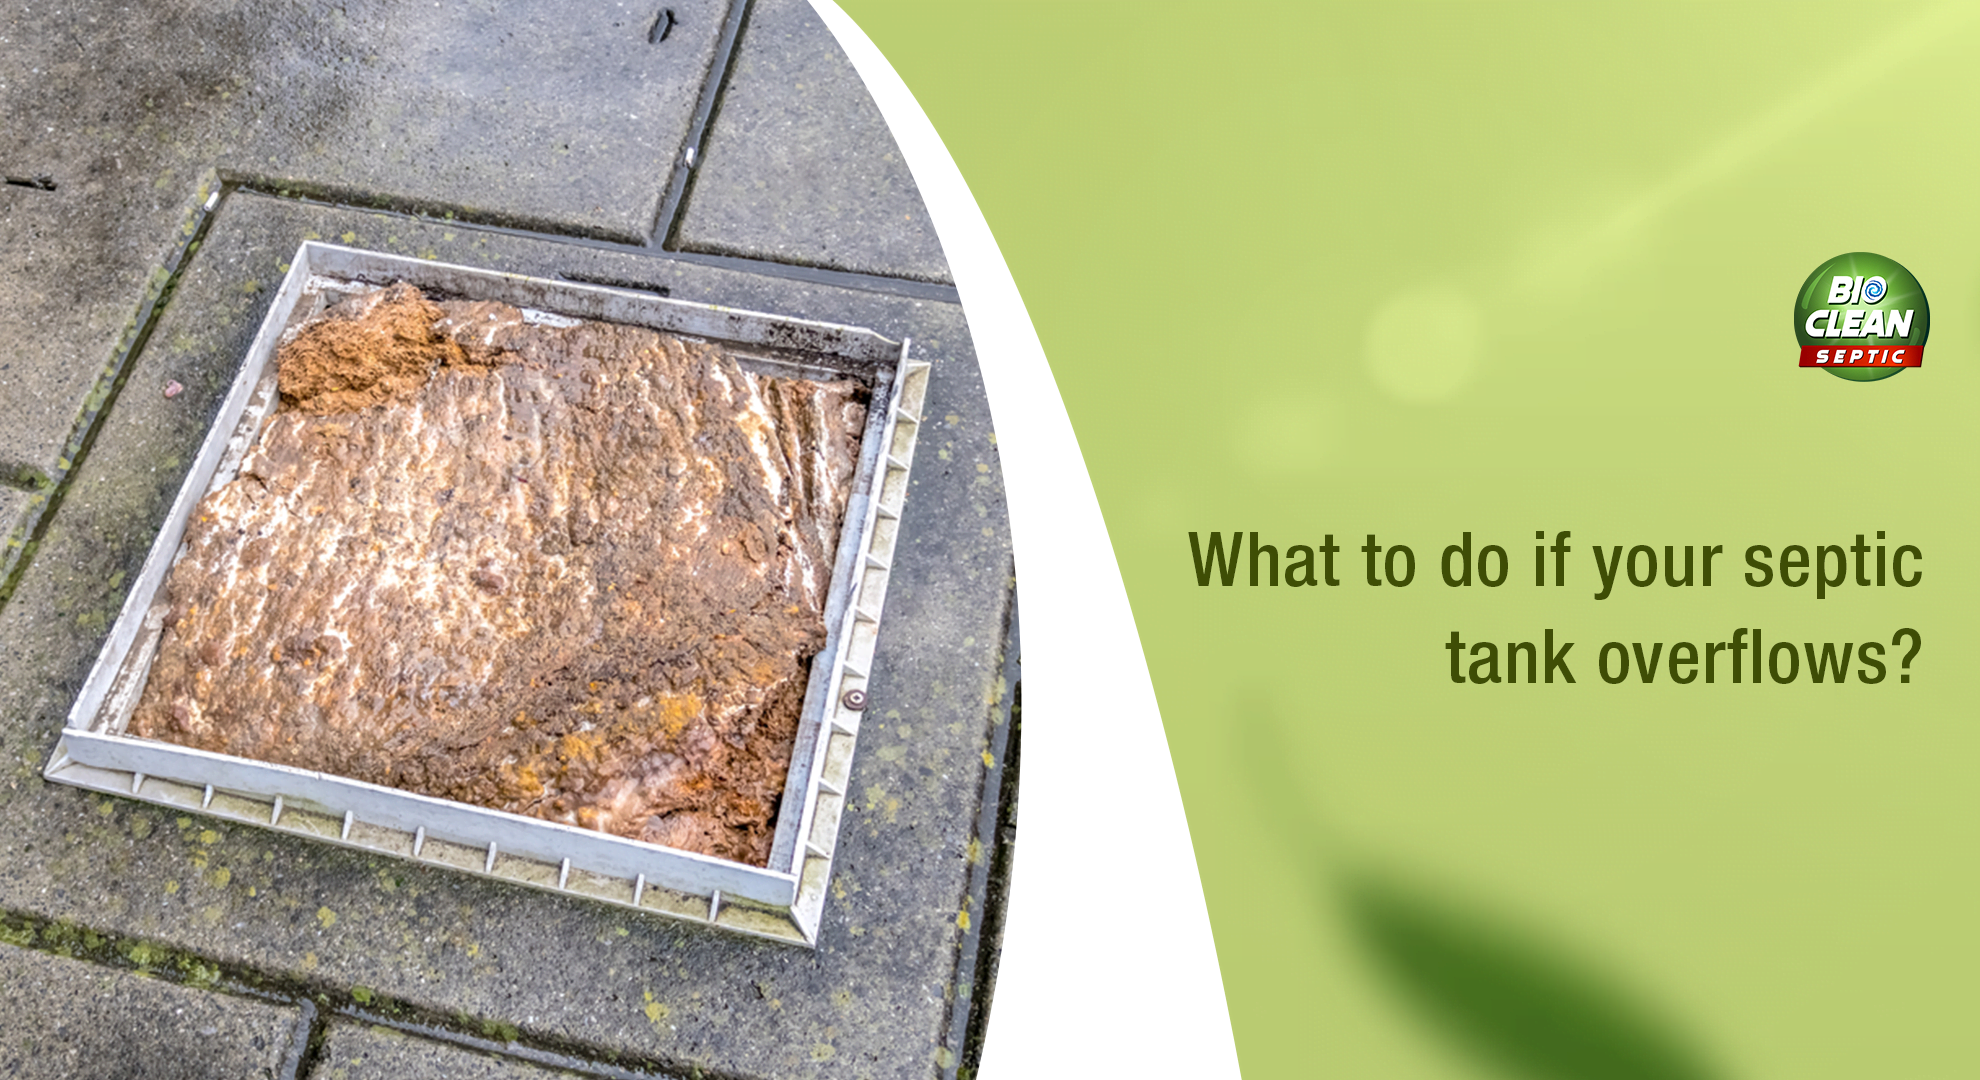 What To Do If Your Septic Tank Overflows?